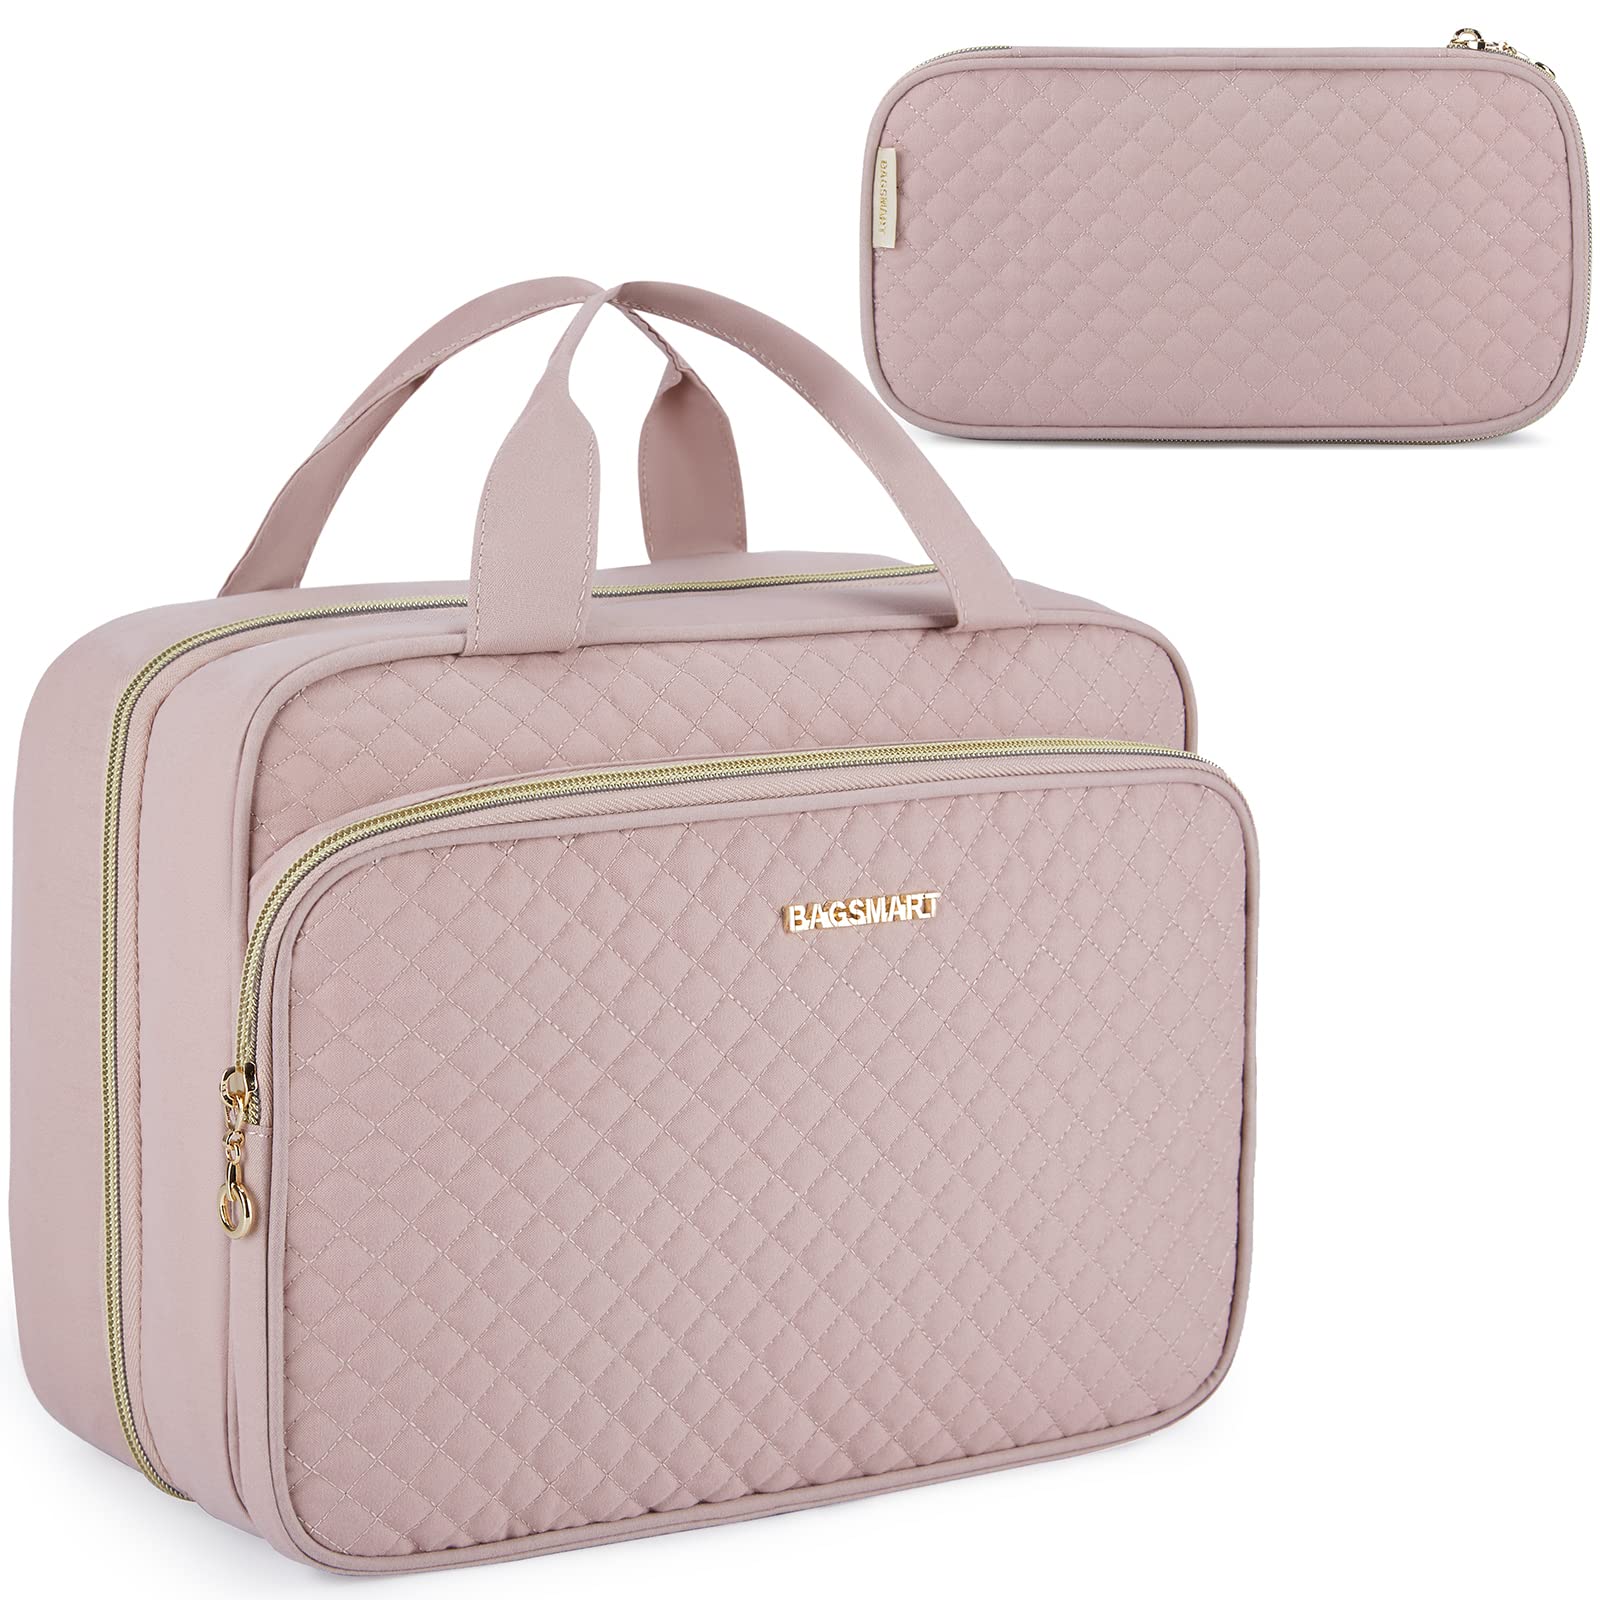 BAGSMART Space Saver Pro Toiletry Bag with Cosmetic Bag for Travel, Large / Baby Pink